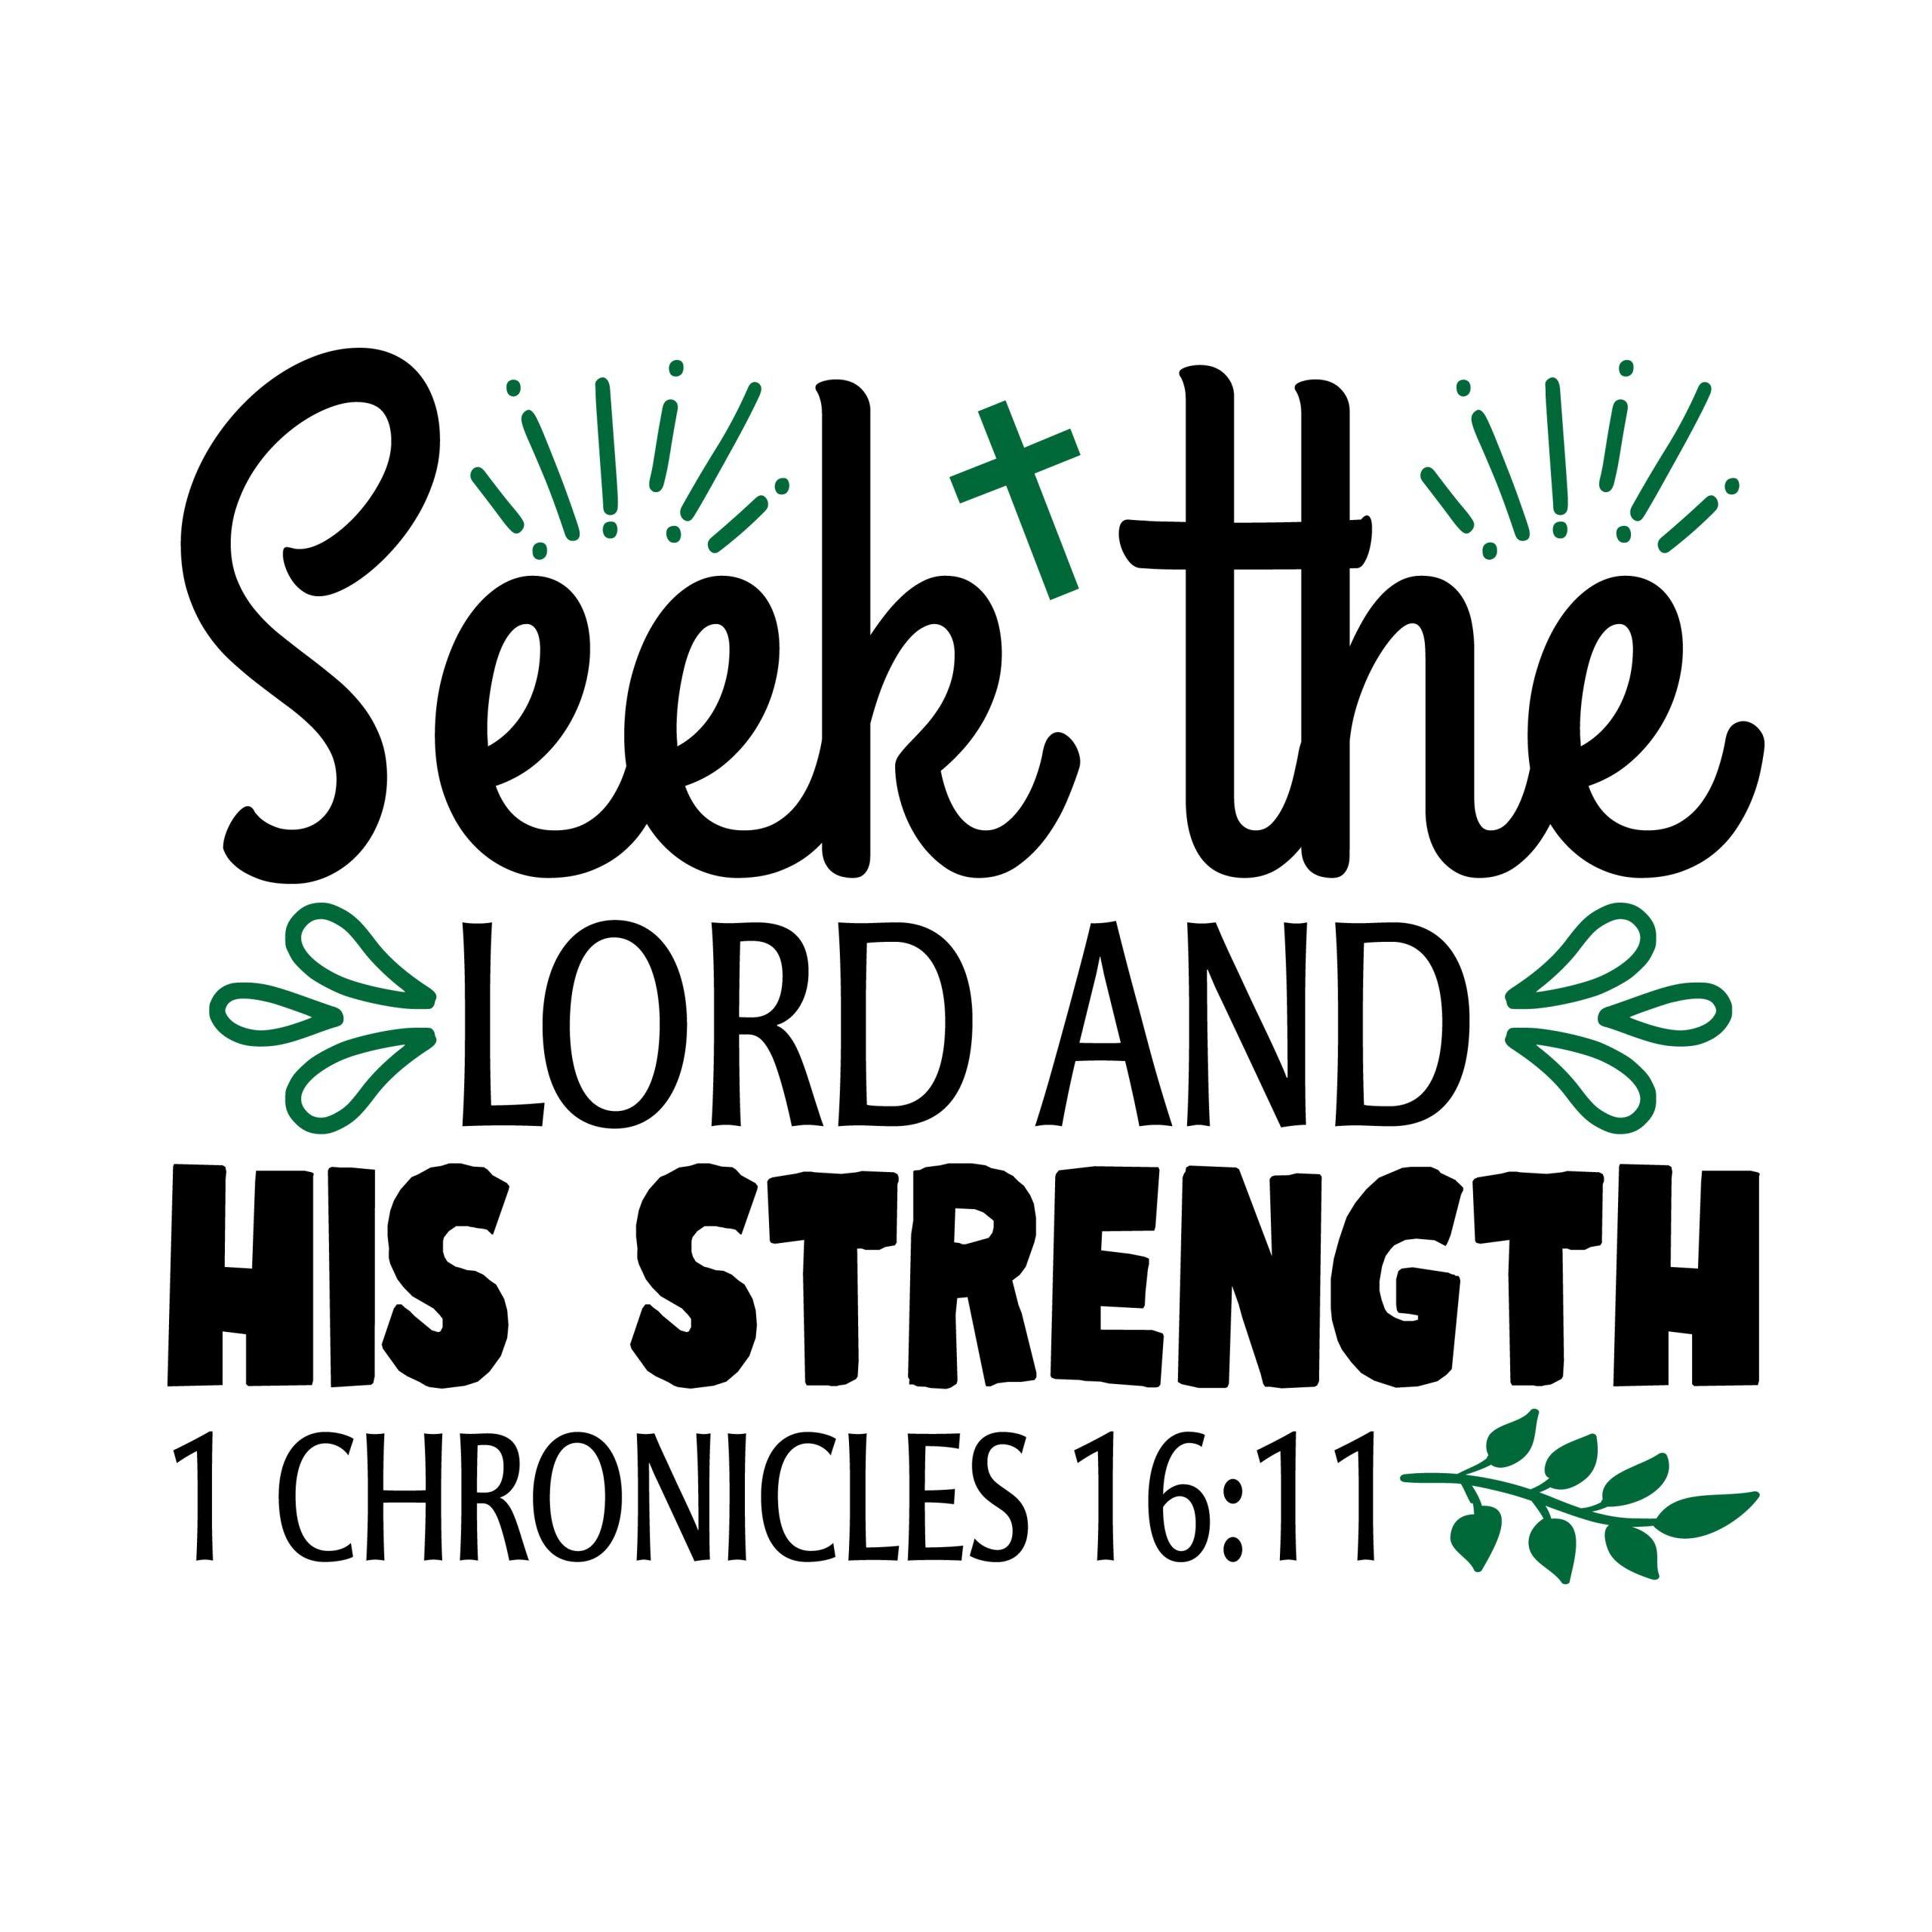 Seek the lord and his strength 1 Chronicles 16:11, bible verses, scripture verses, svg files, passages, sayings, cricut designs, silhouette, embroidery, bundle, free cut files, design space, vector